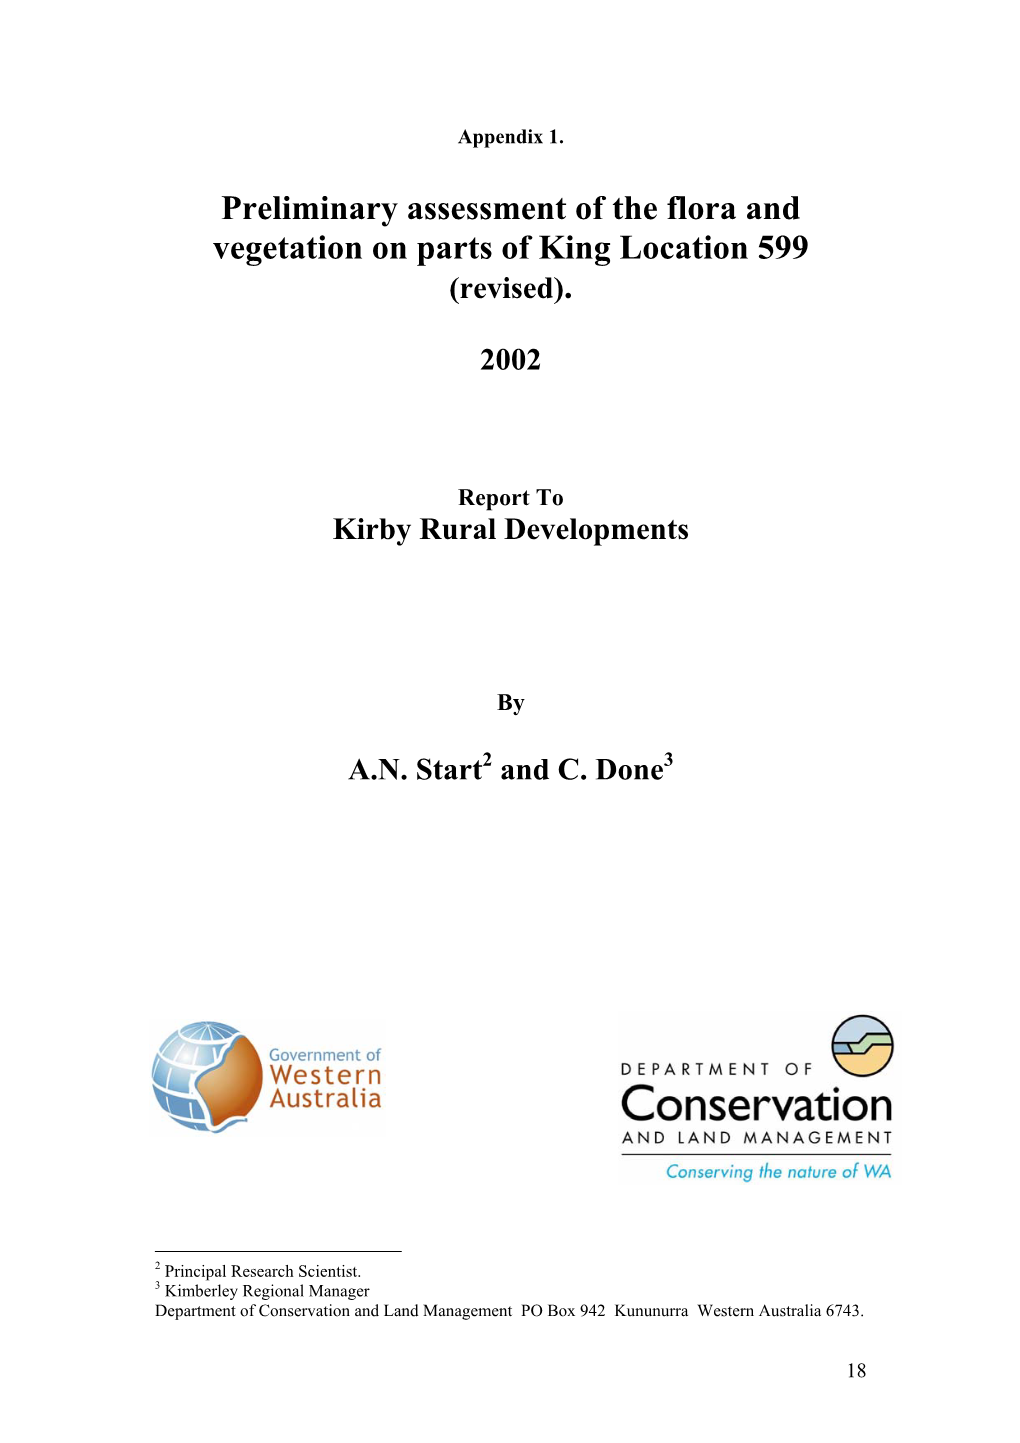 Preliminary Assessment of the Flora and Vegetation on Parts of King Location 599 (Revised)